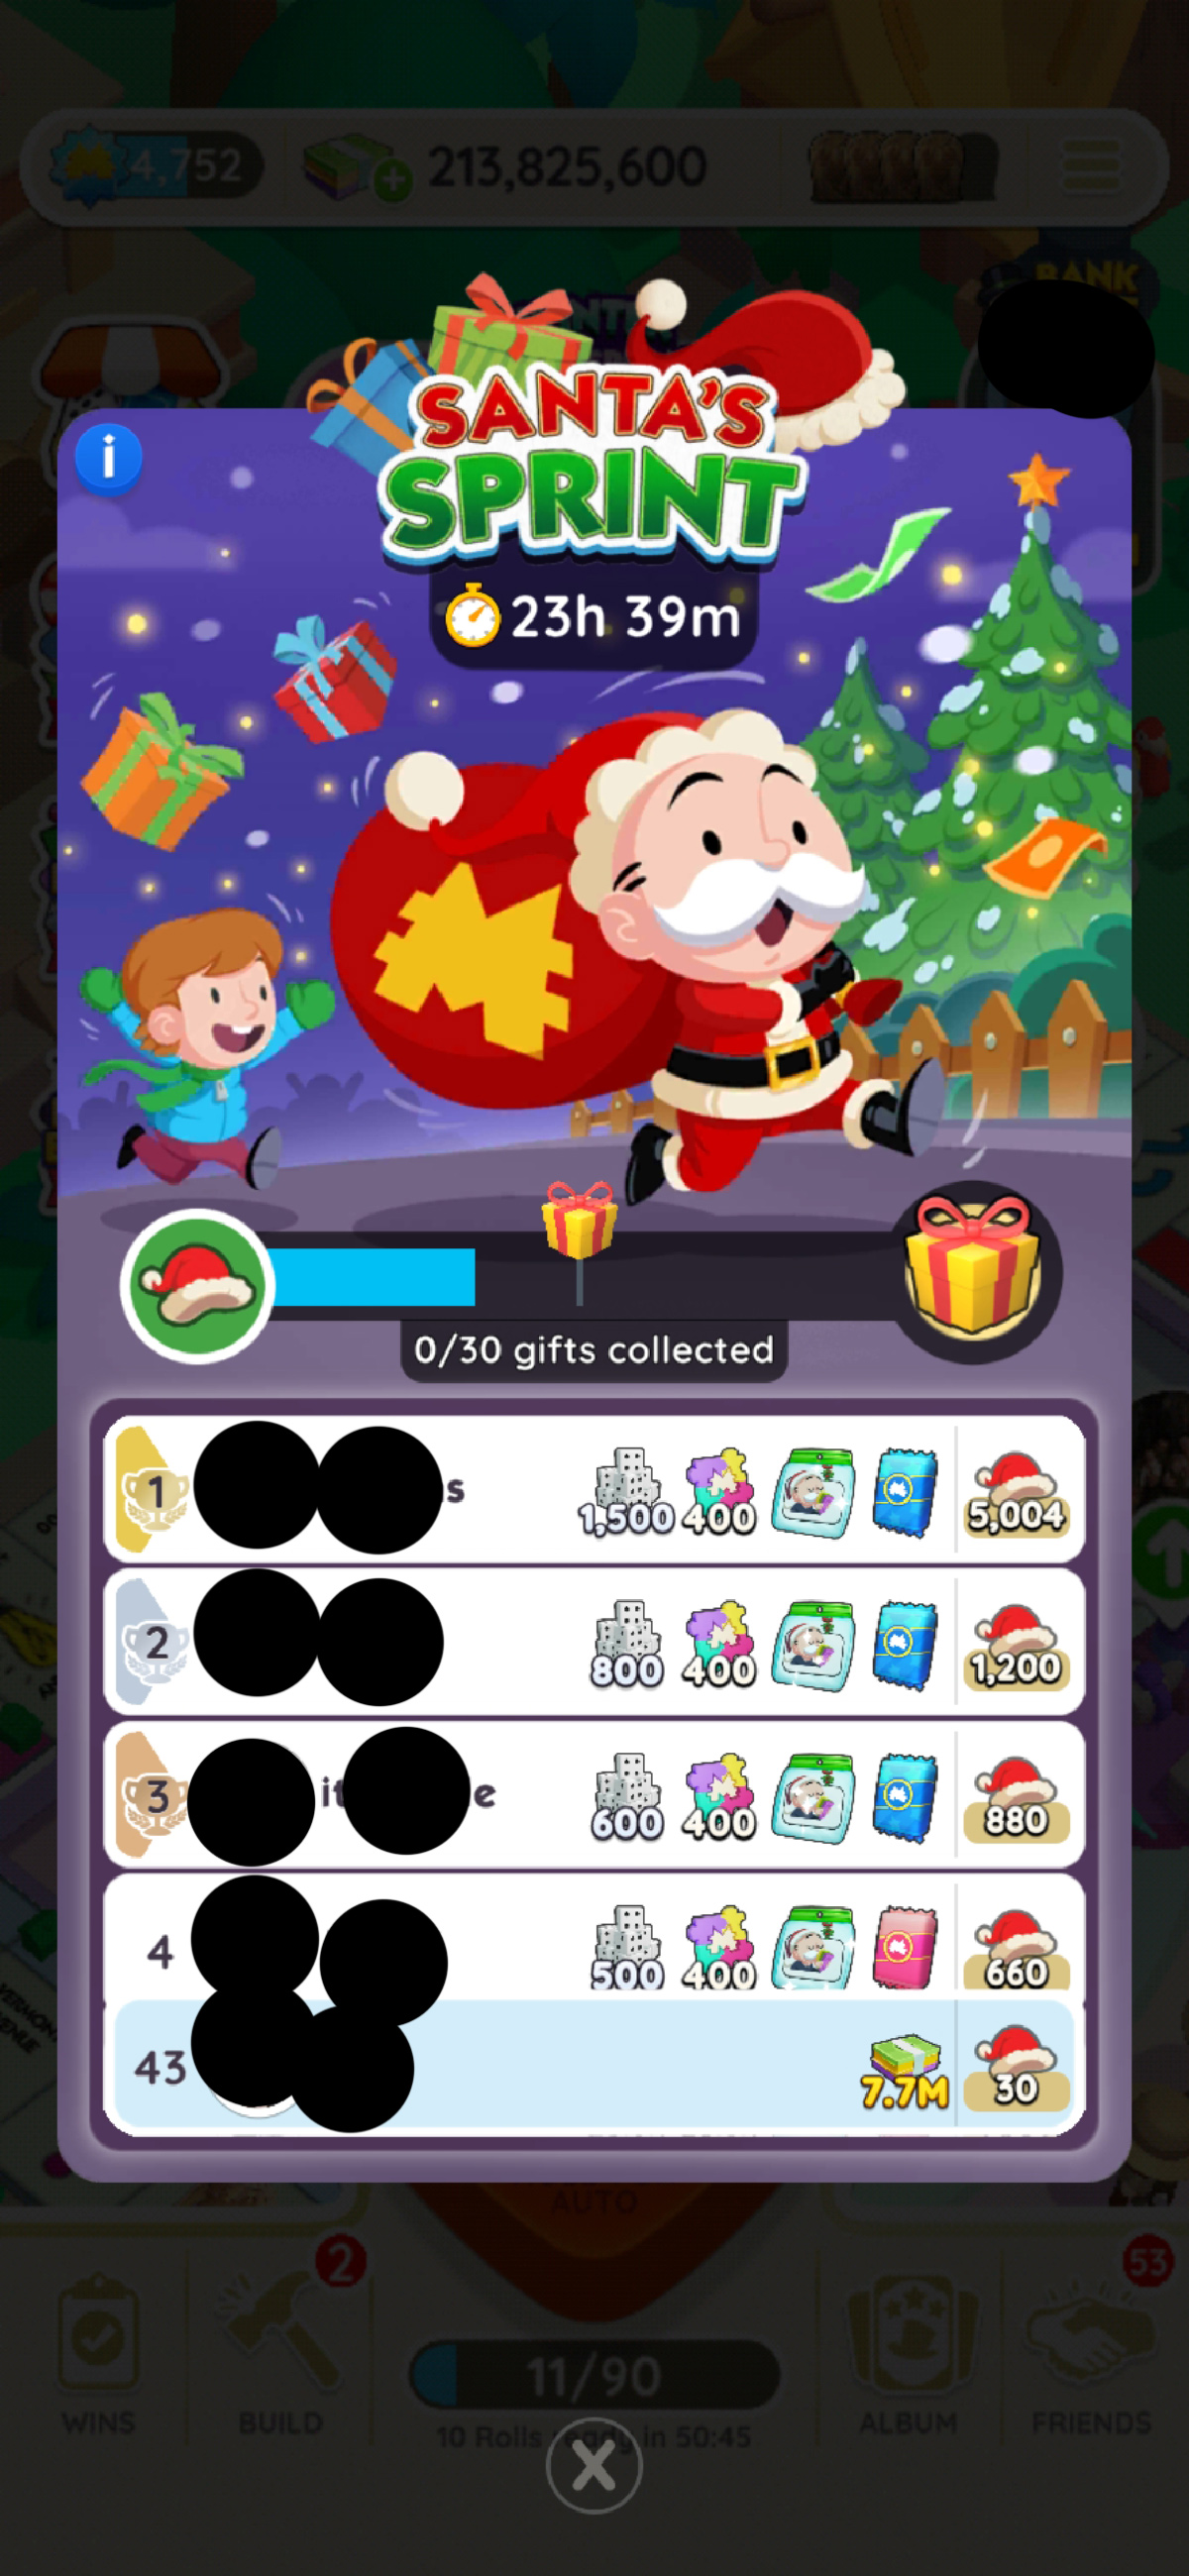 A header image for the Santa's Sprint event in Monopoly GO that shows Mr. Monopoly running around dressed up as Santa Claus while a child chases him. The image is part of an article on all the rewards and milestones available as part of the Santa's Sprint event in Monopoly GO.